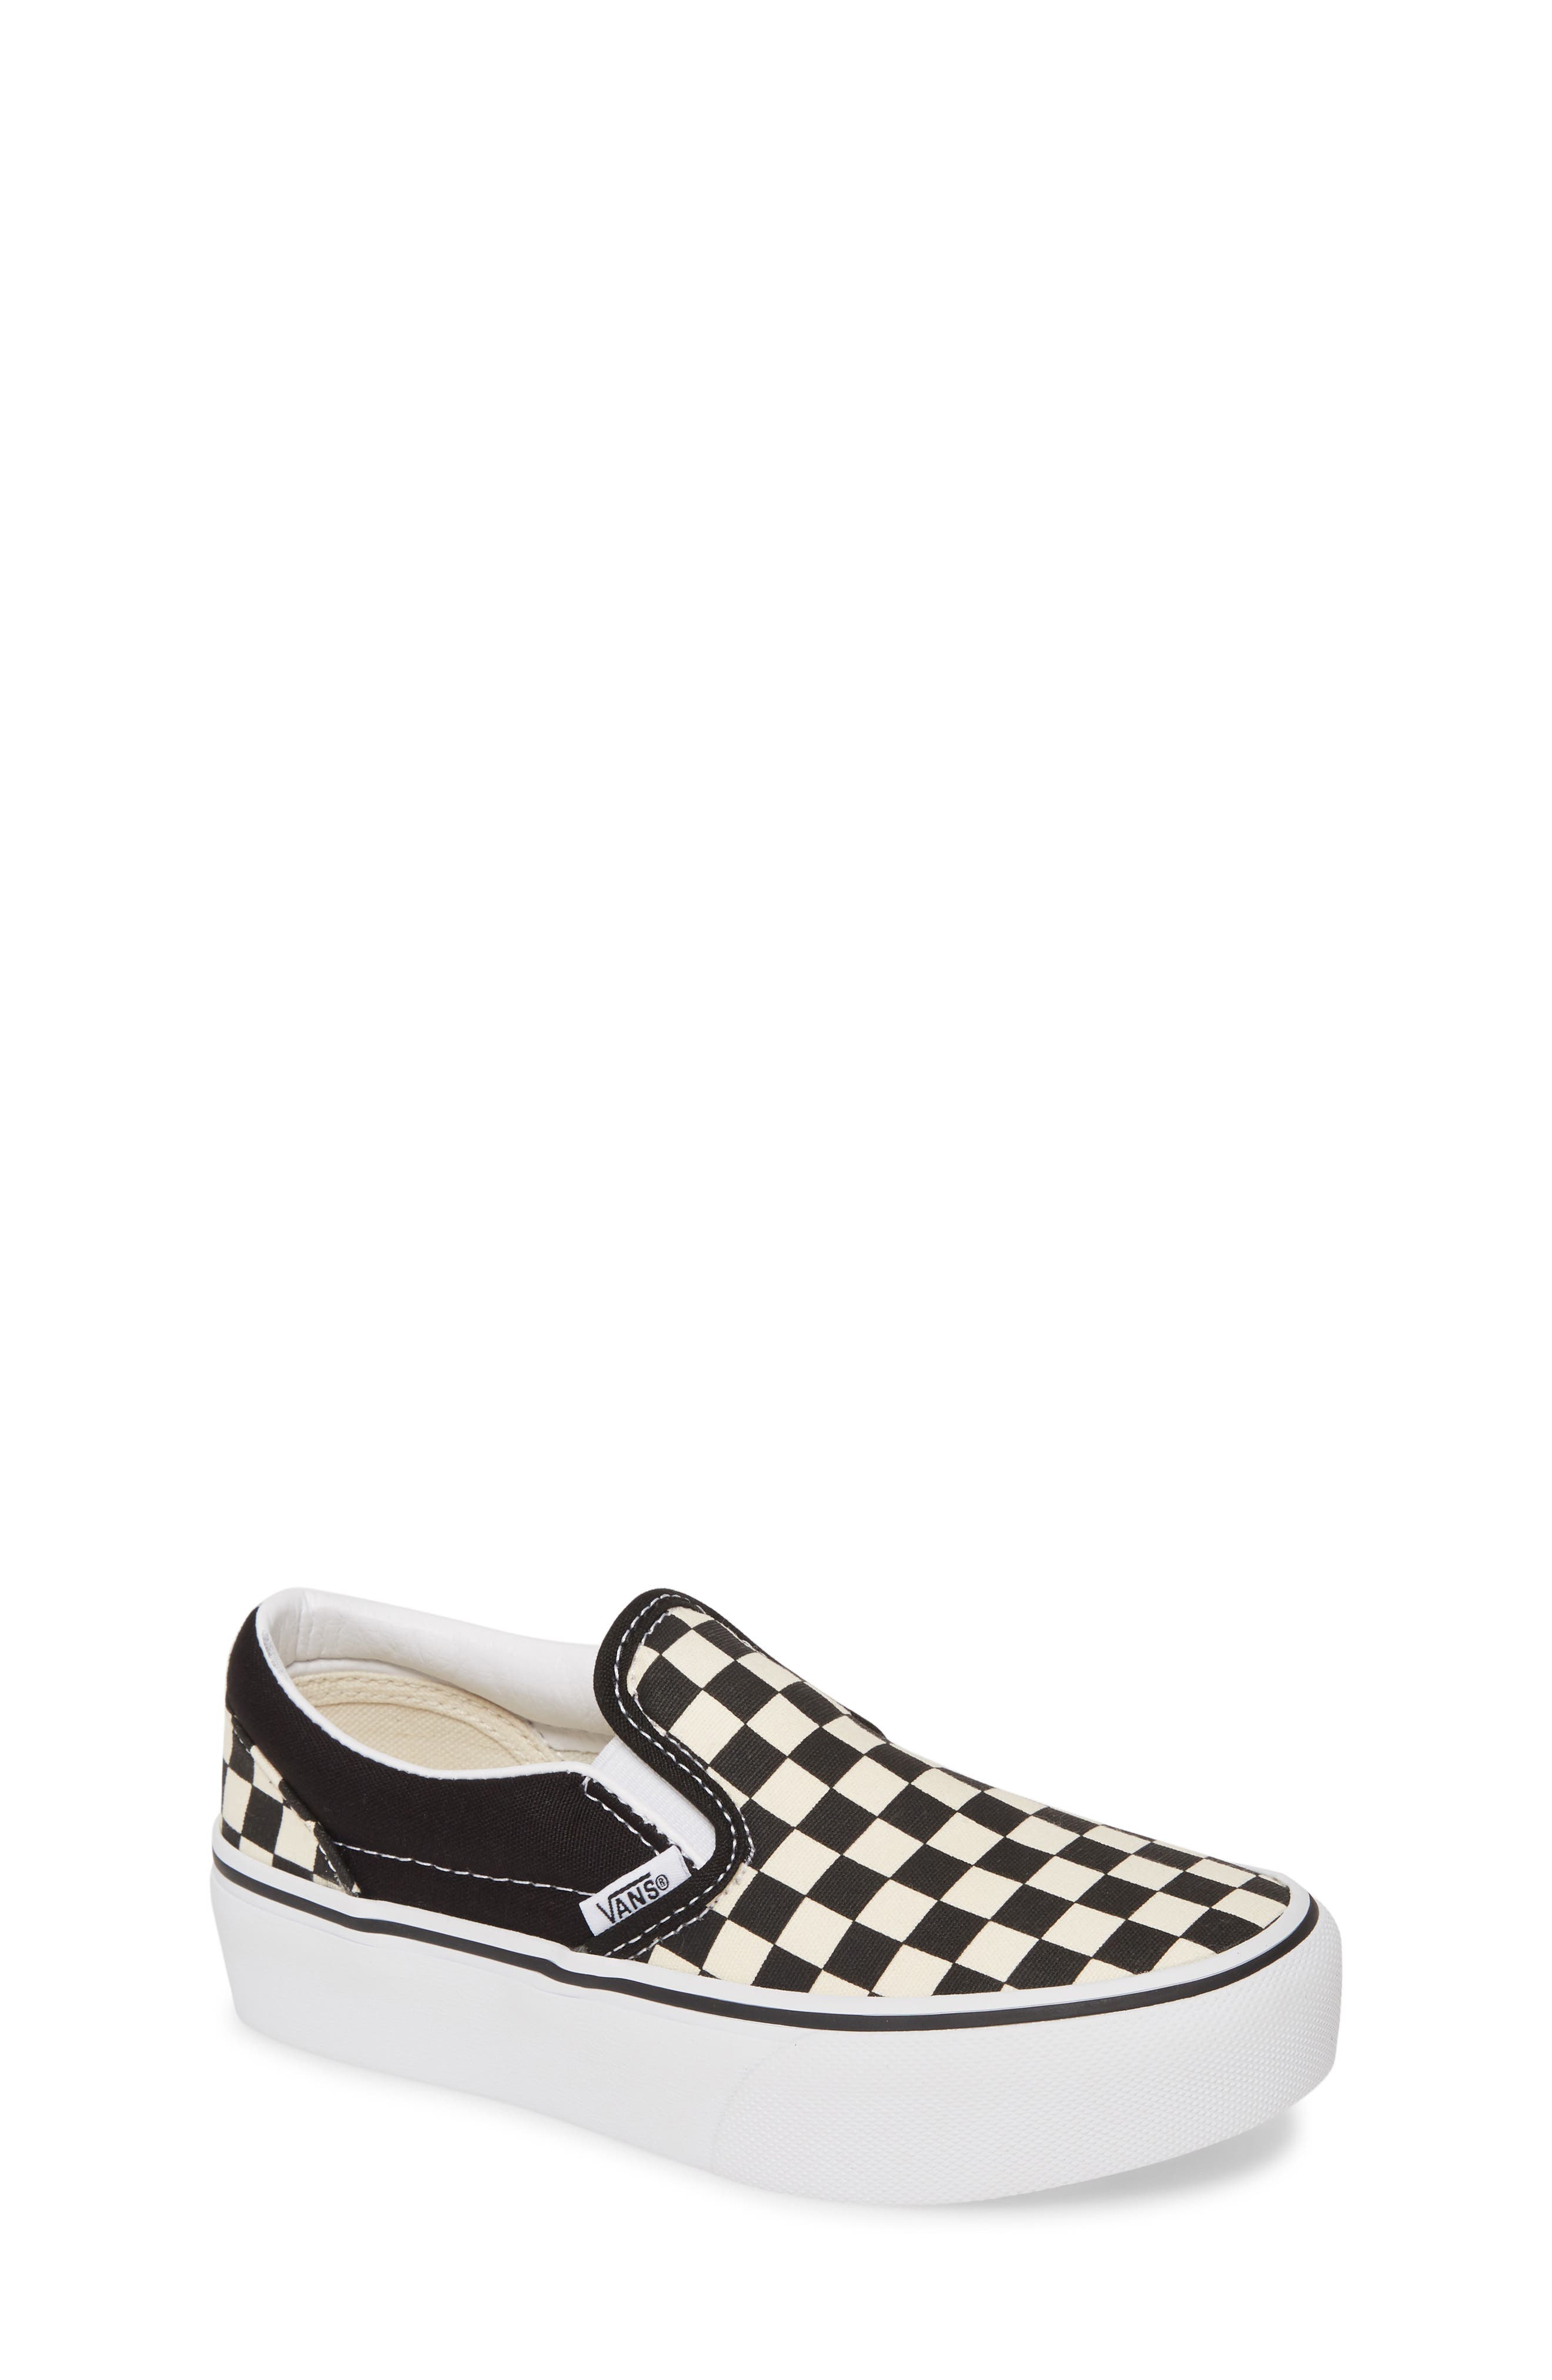 vans shoes for girls black and white